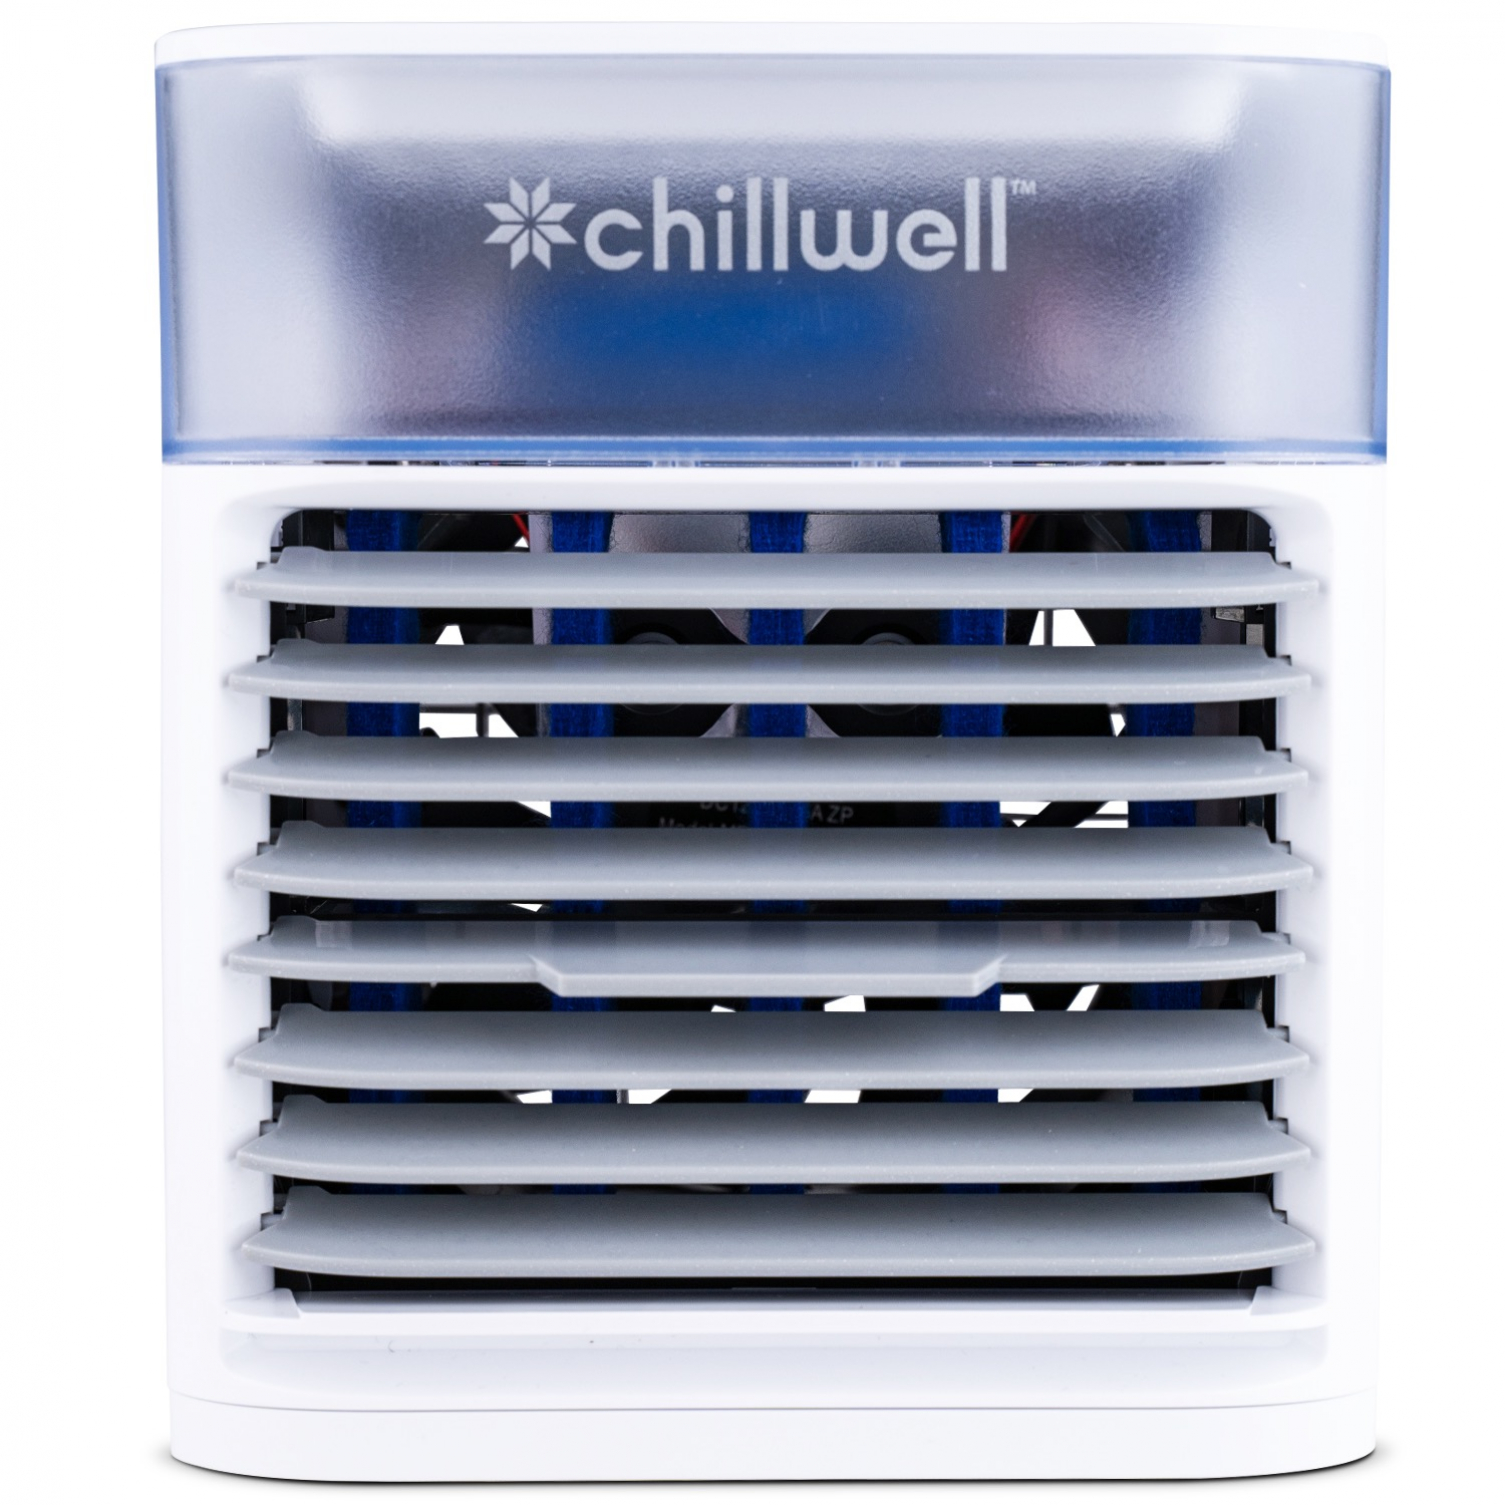 Personal Chillwell Ac Cooler